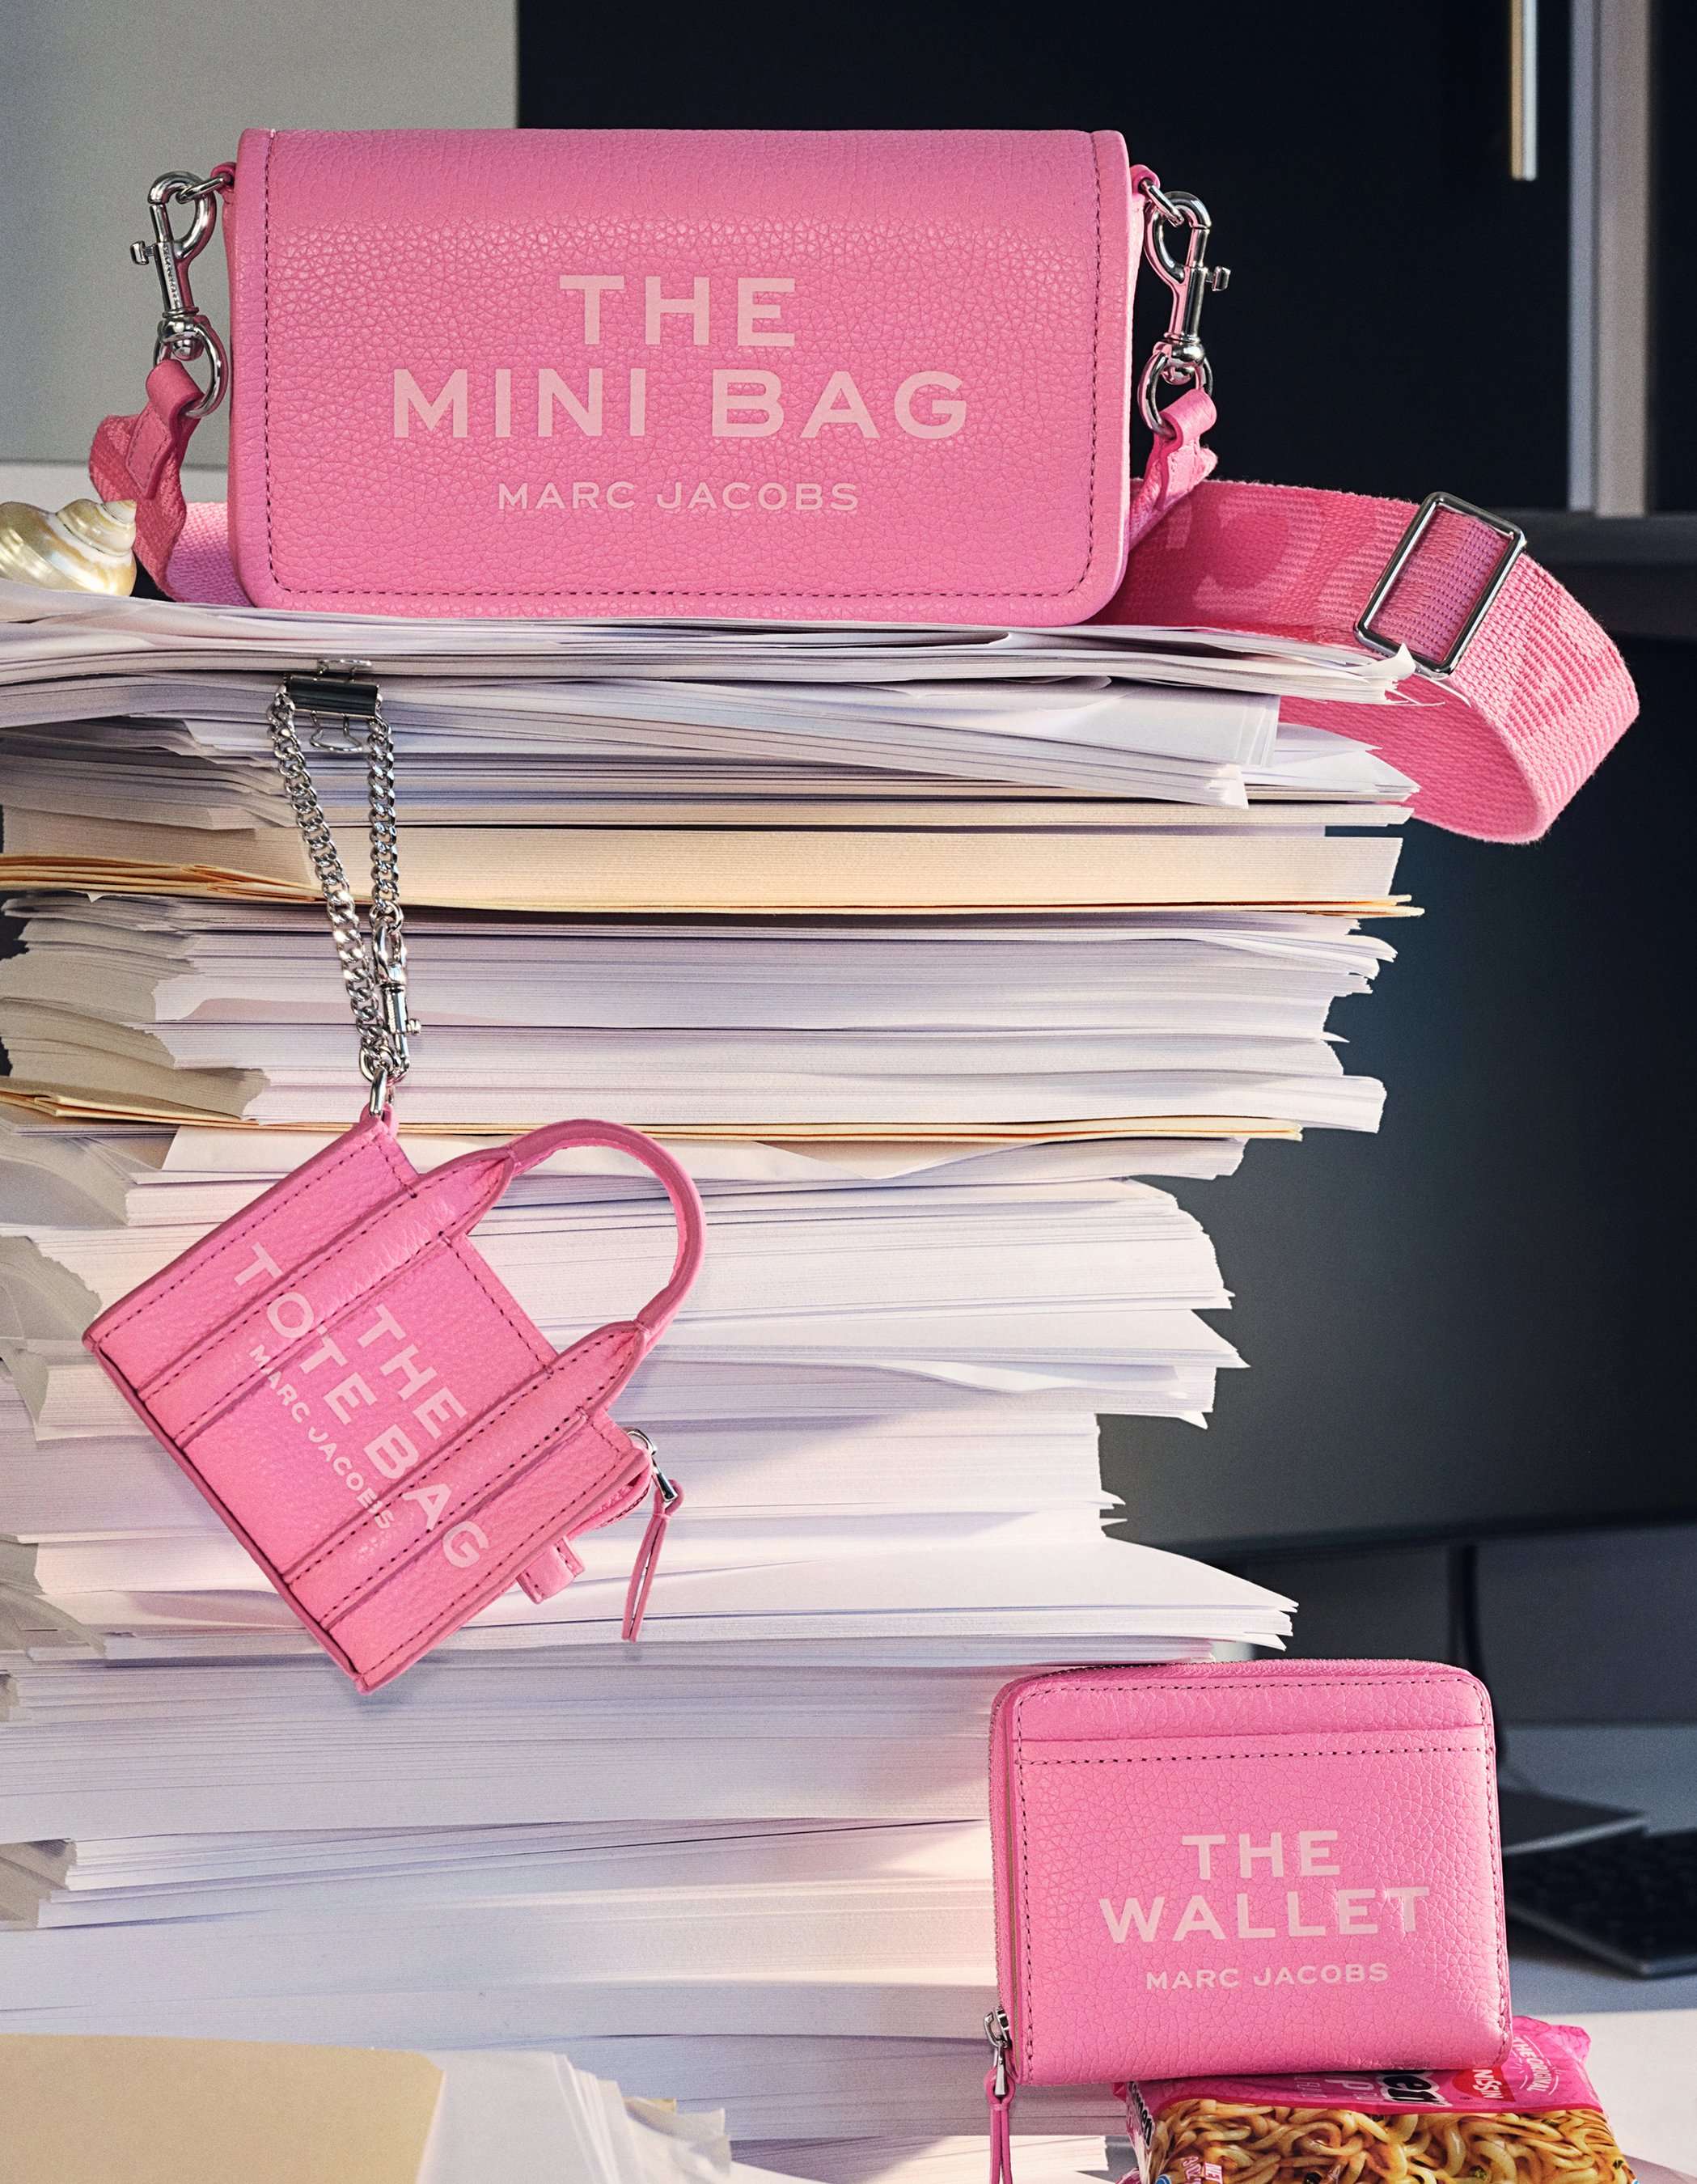 The Leather Mini Bag, The Wallet, and The Nano Tote Bag charm, all in Petal Pink, resting on a stack of papers.